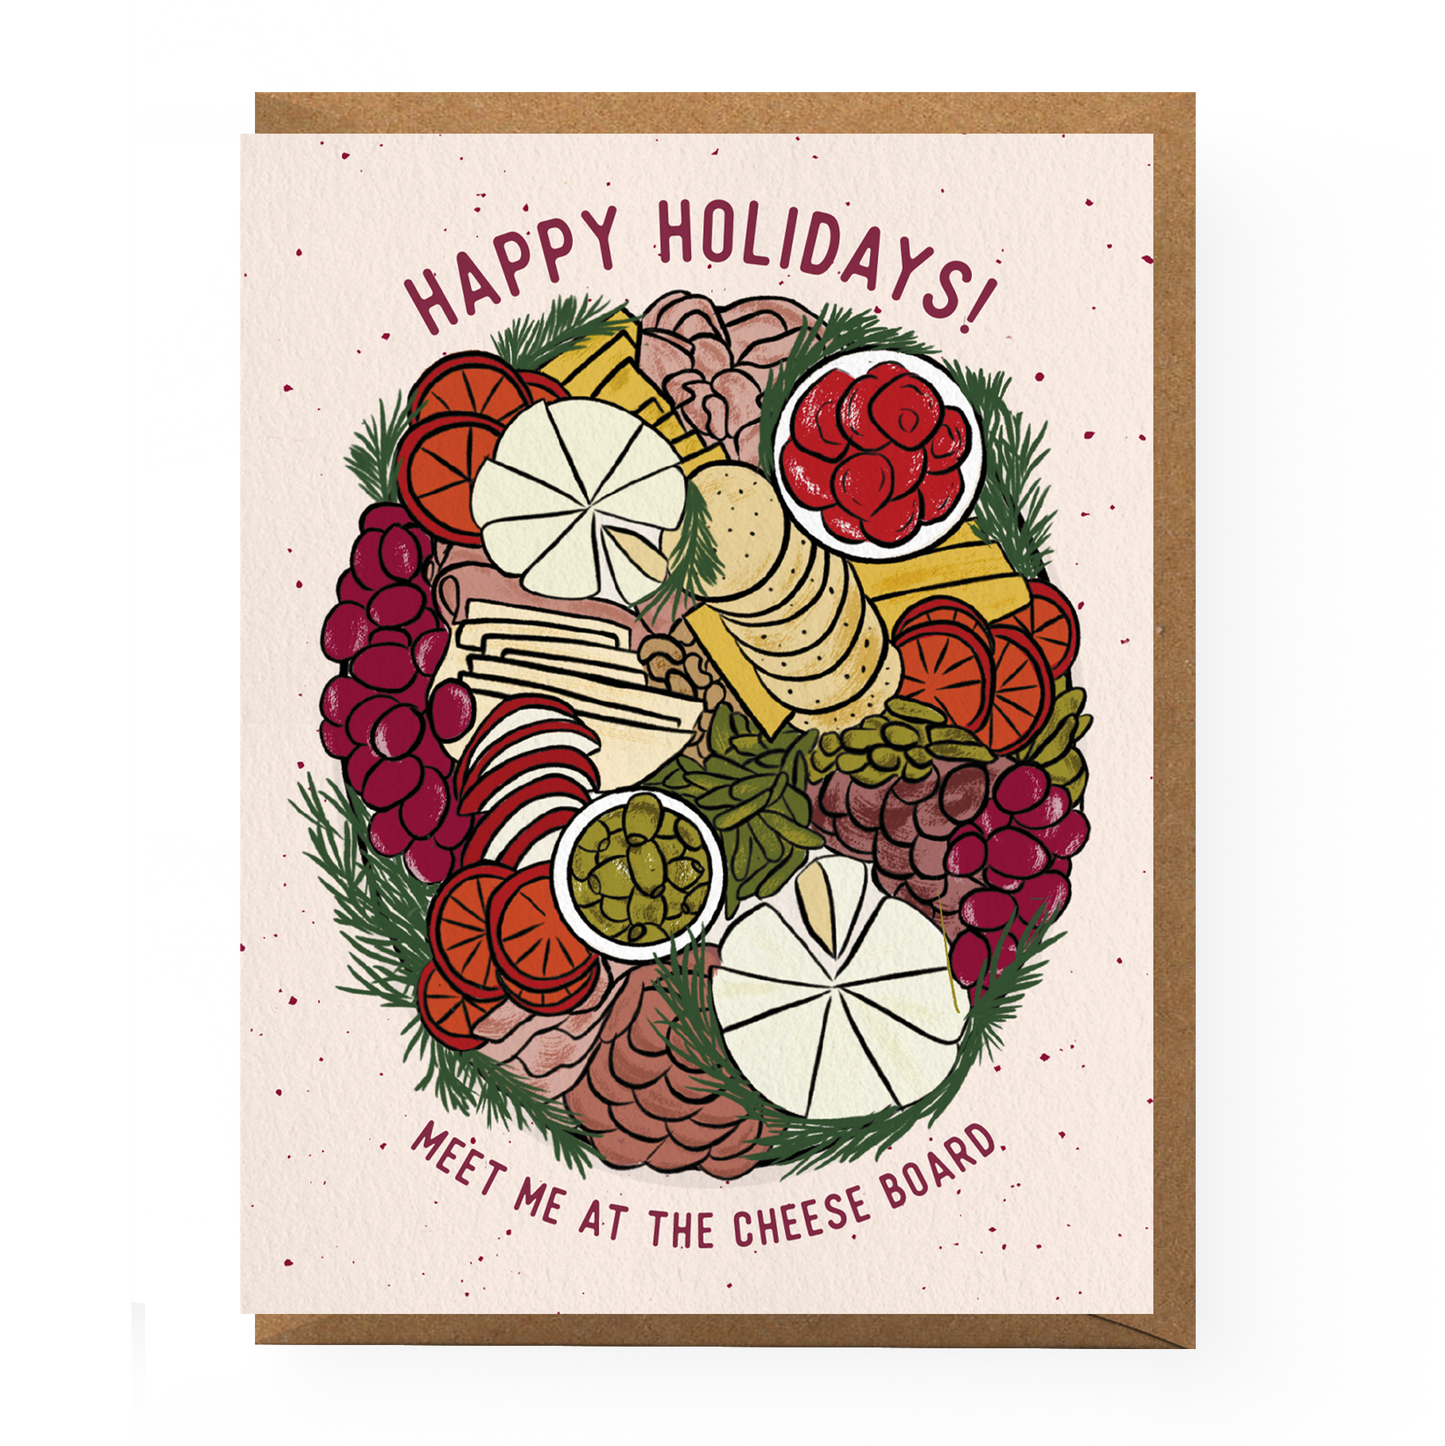 Greeting card with text on top "Happy Holidays!" and text on bottom "Meet me at the cheese board." Illustration on center of card features a cheese and charcuterie board with festive green herbs around the edges.